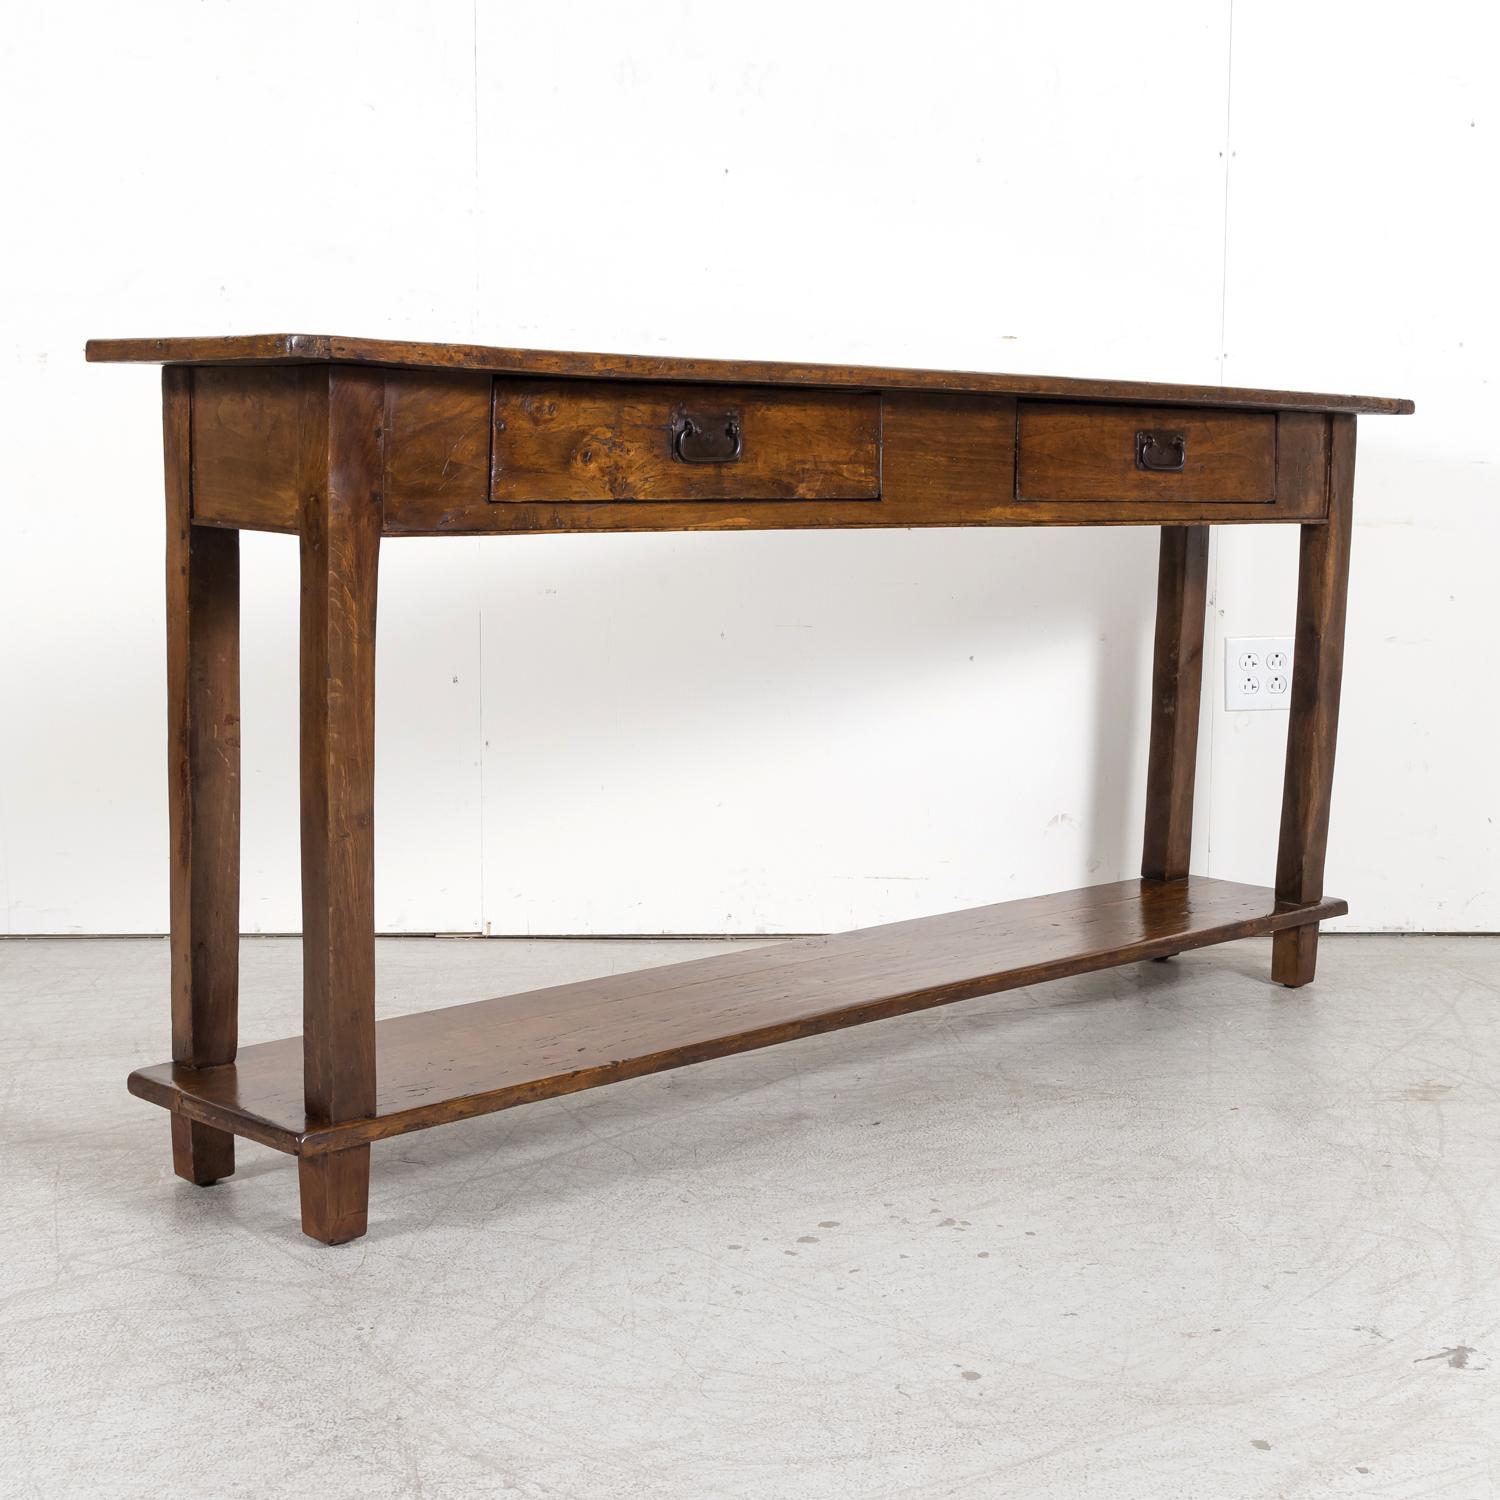 19th Century Rustic Antique Country French Walnut and Oak Console or Sofa Table with Drawers